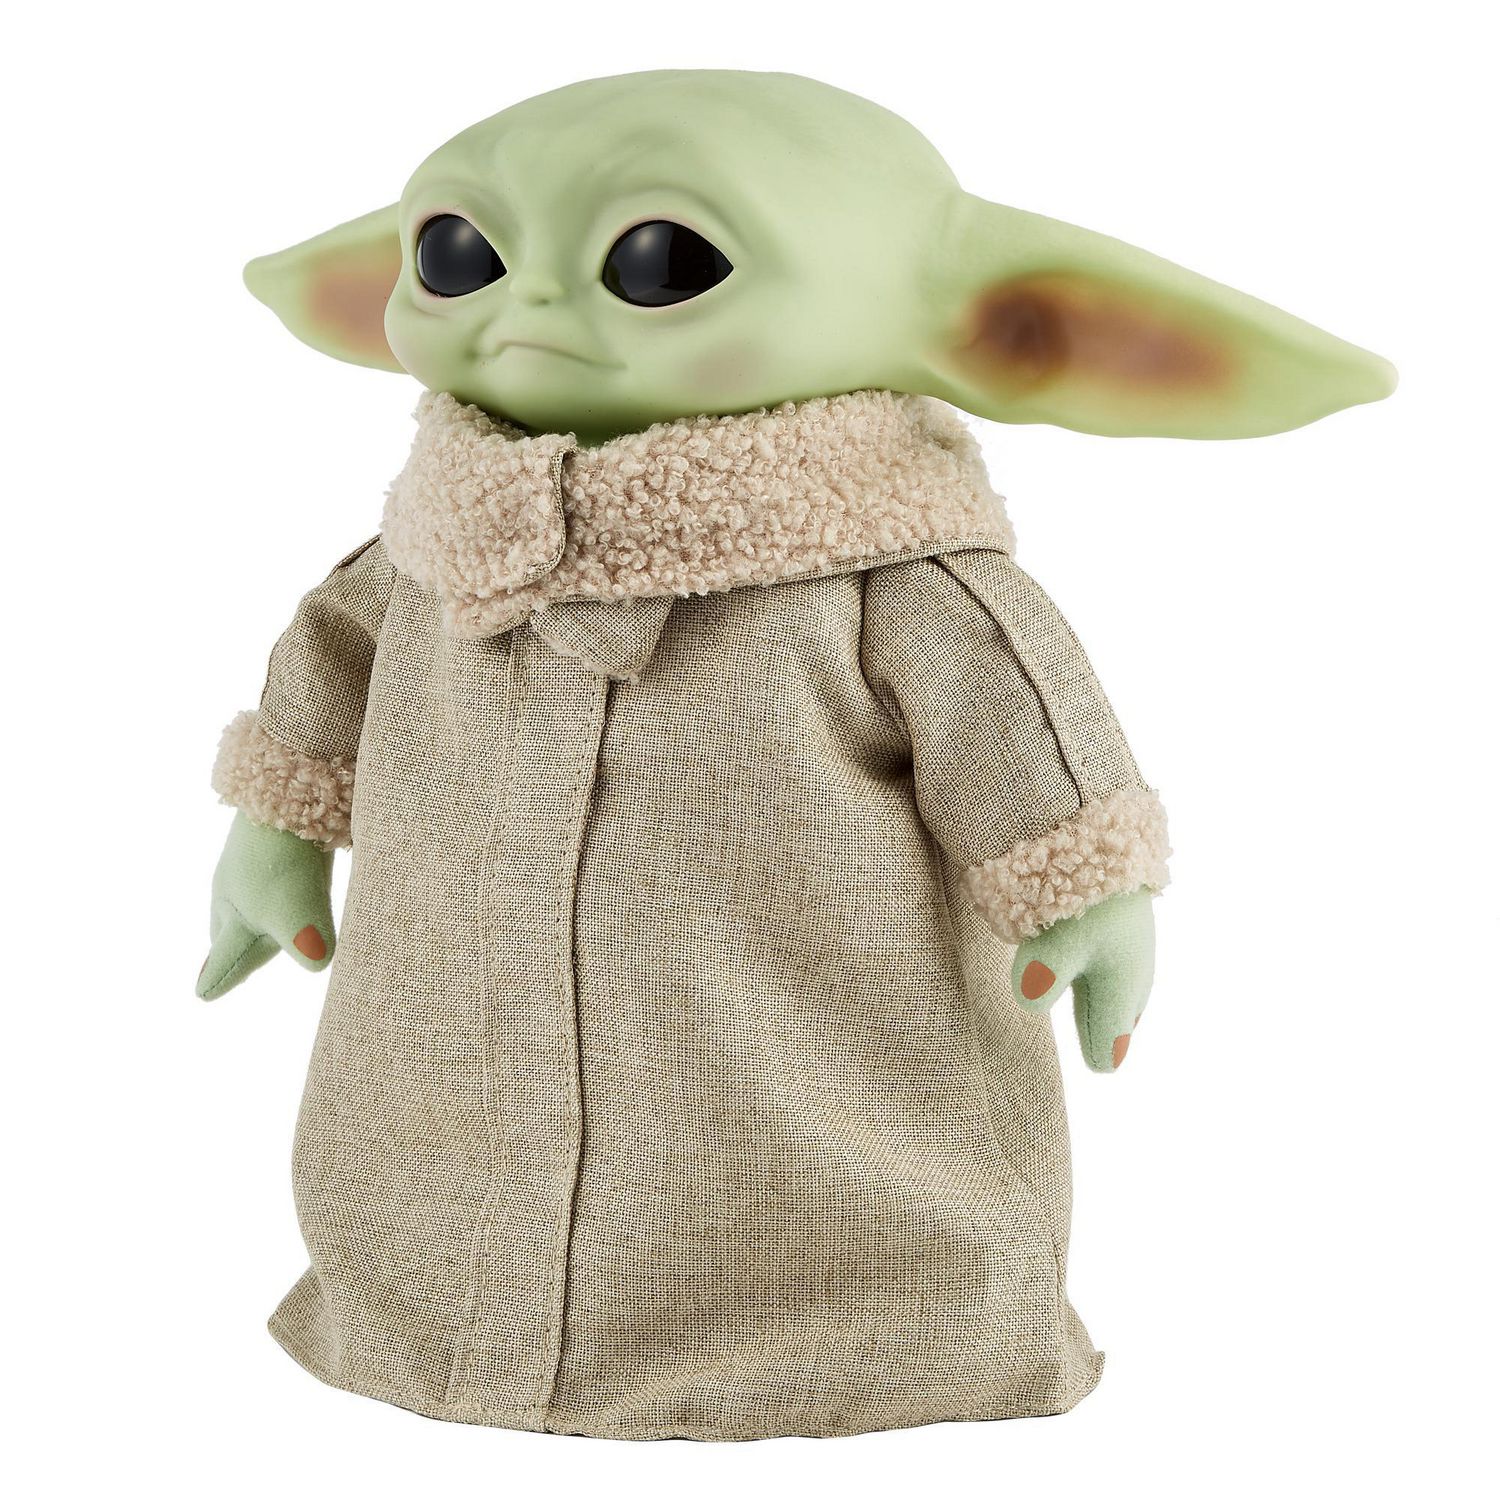 Star Wars Grogu The Child Baby Yoda 12-in Plush RC Motion RC Toy